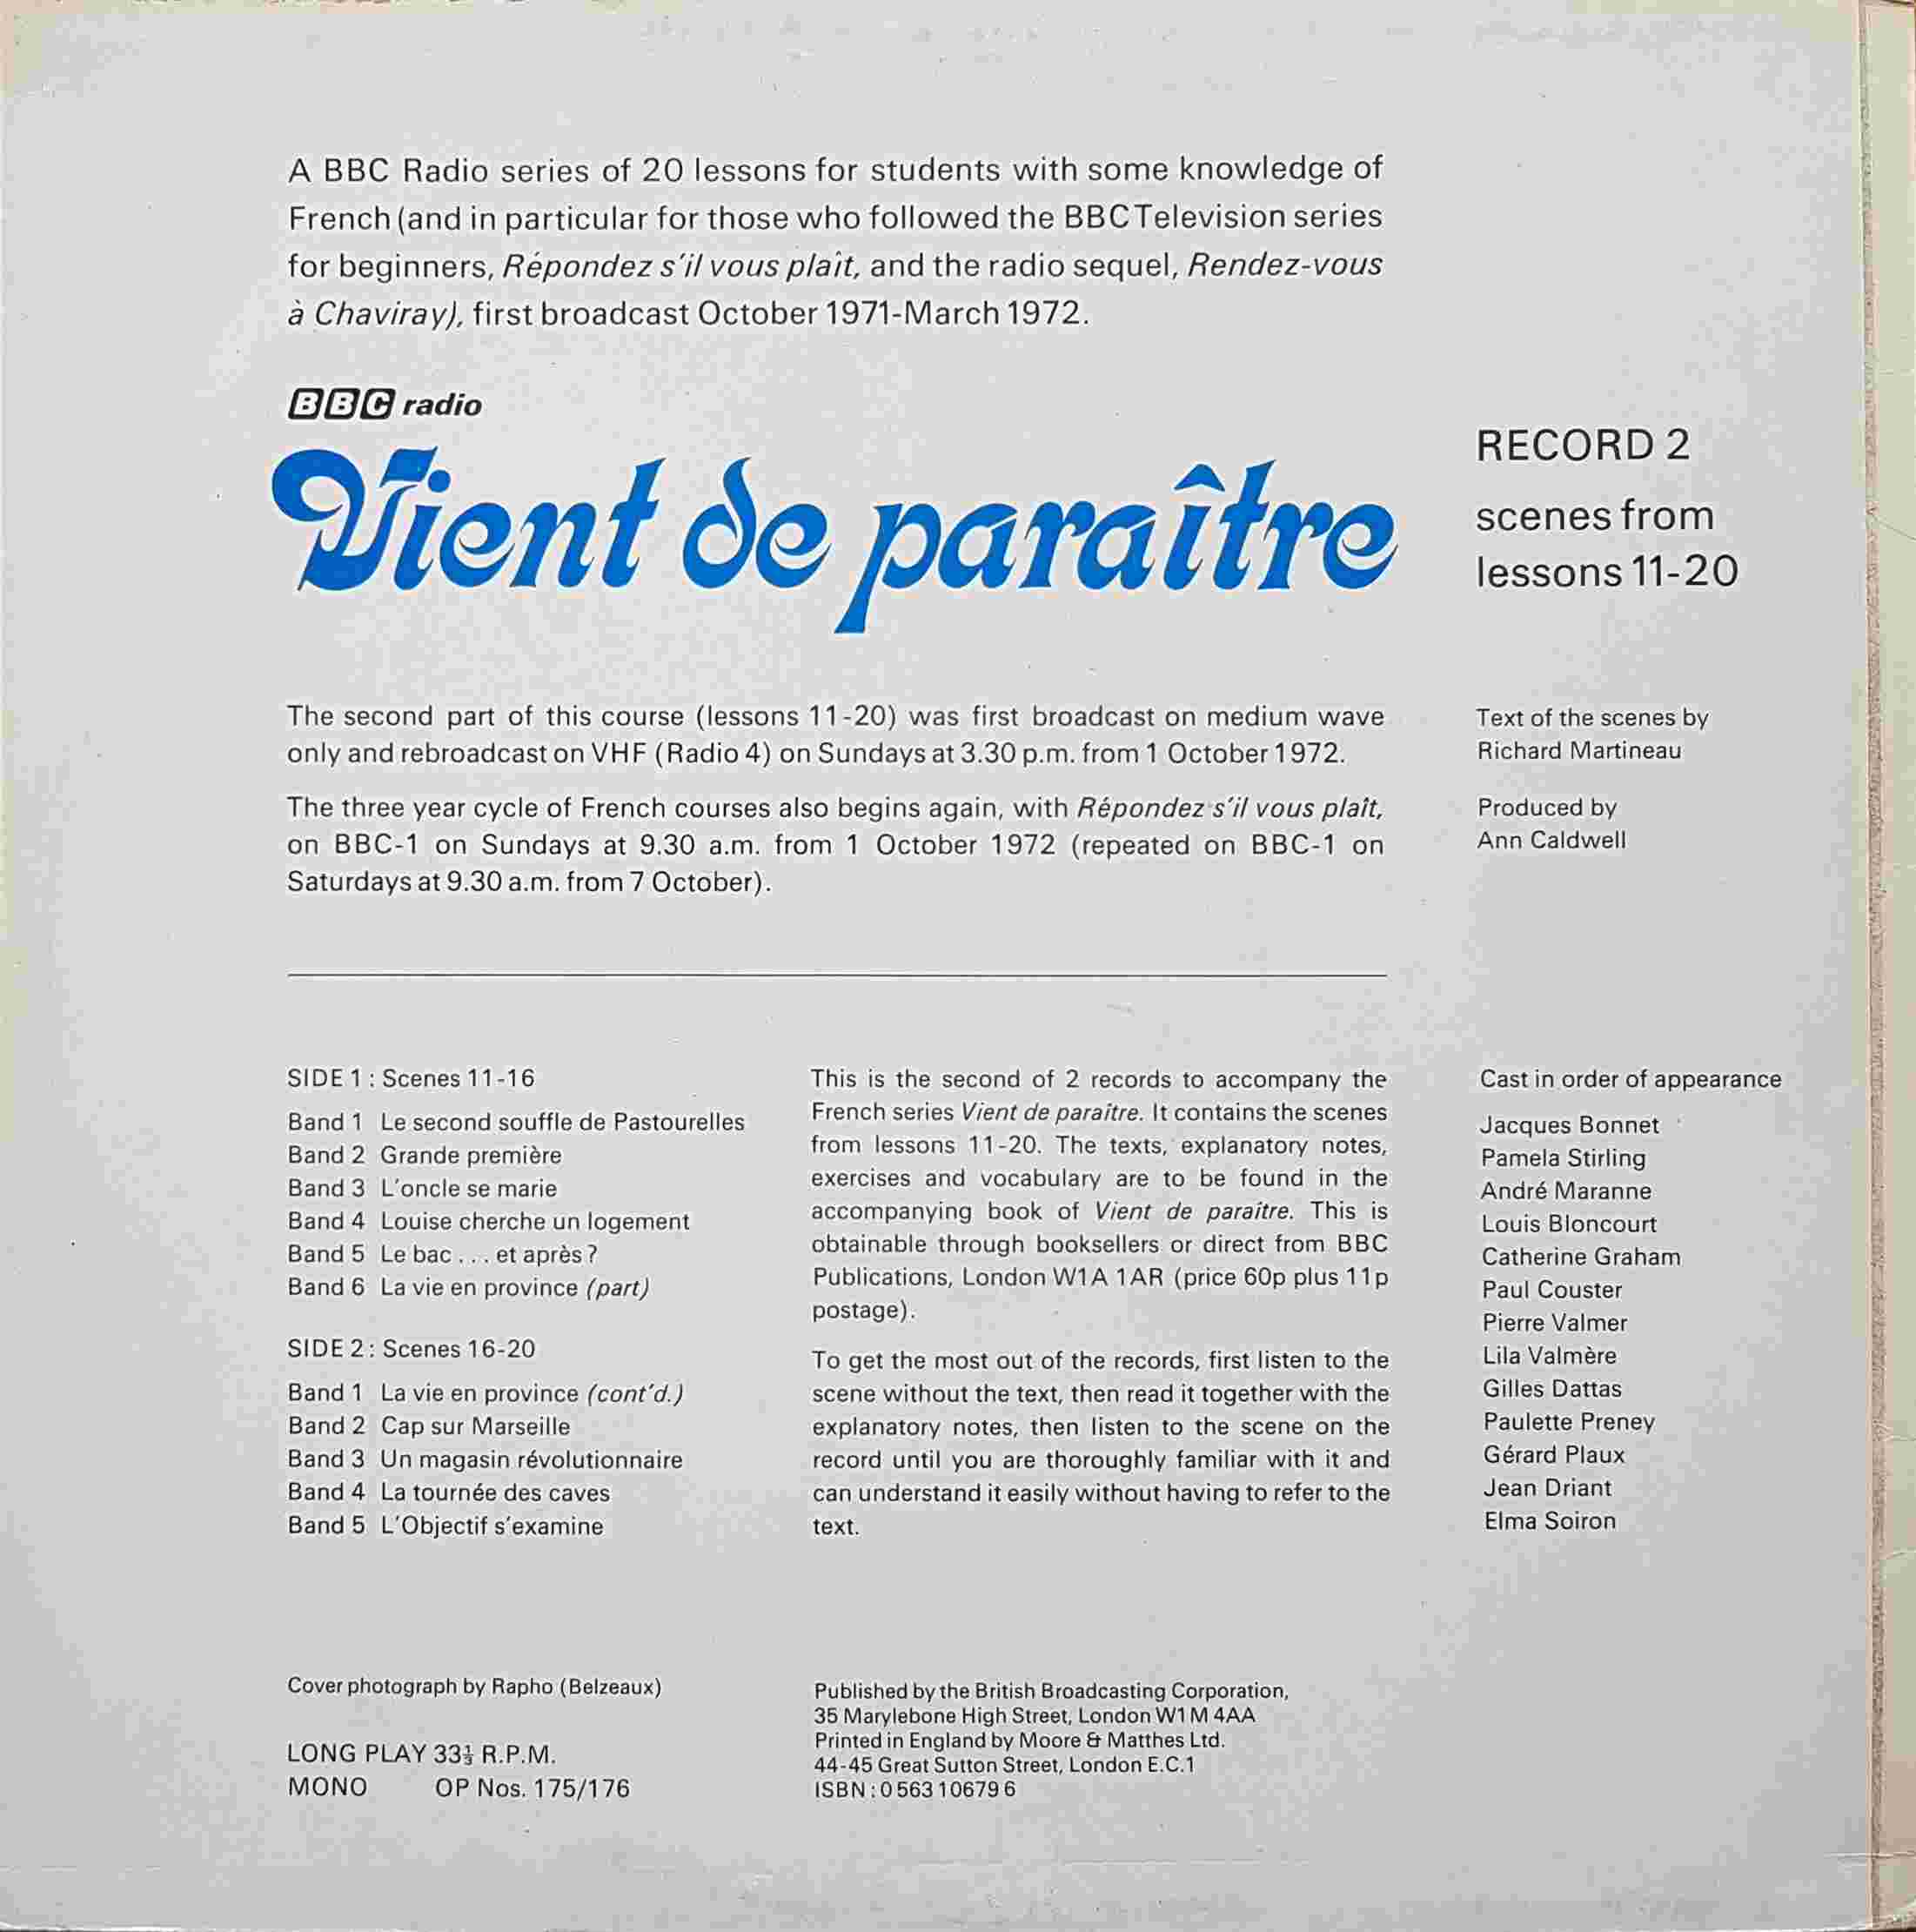 Picture of OP 175/176 Vient de paraitre - A BBC radio French series - Record 2 - Lessons 11 - 20 by artist Richard Martineau from the BBC records and Tapes library